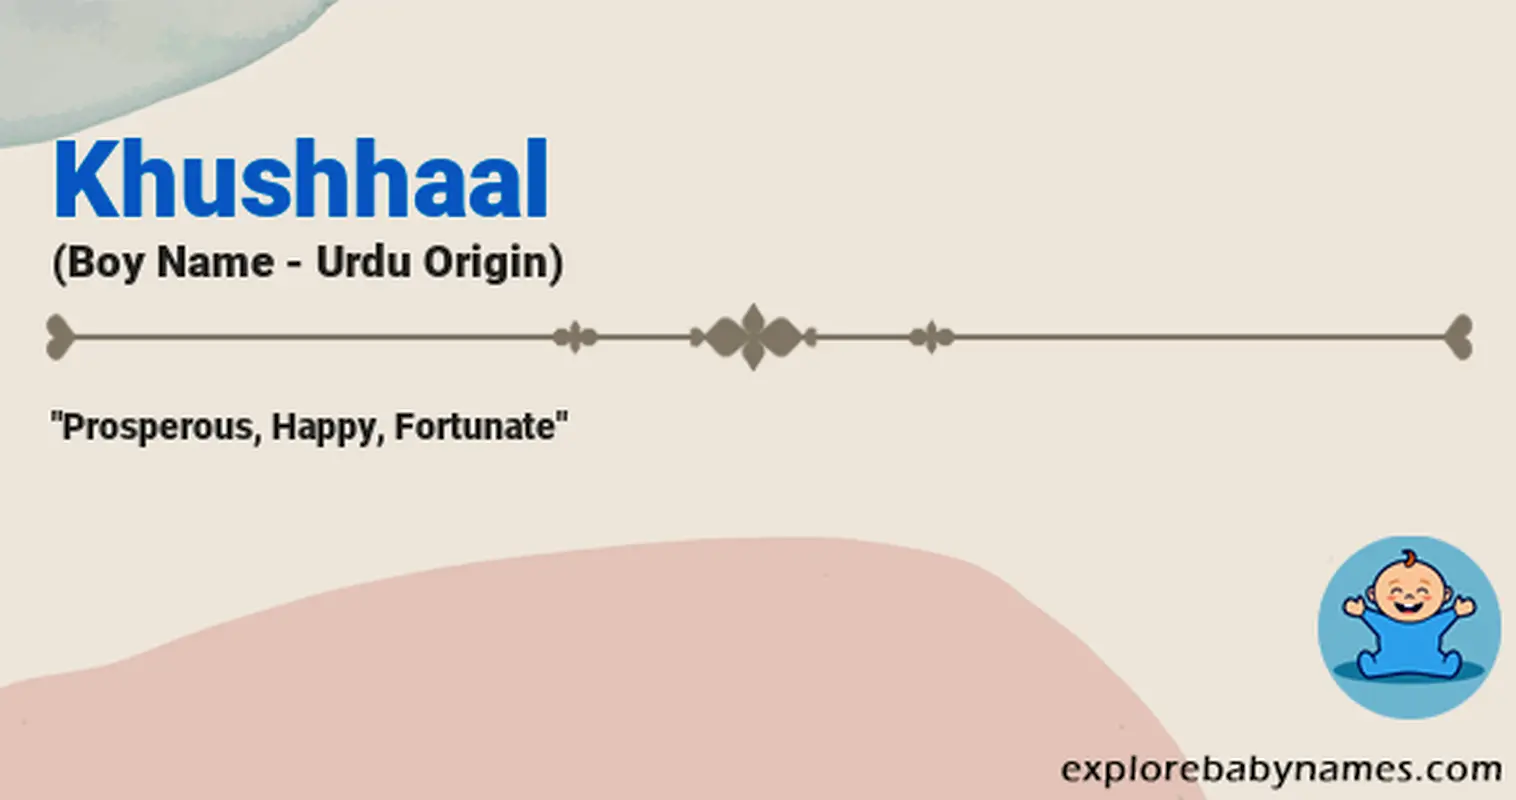 Meaning of Khushhaal